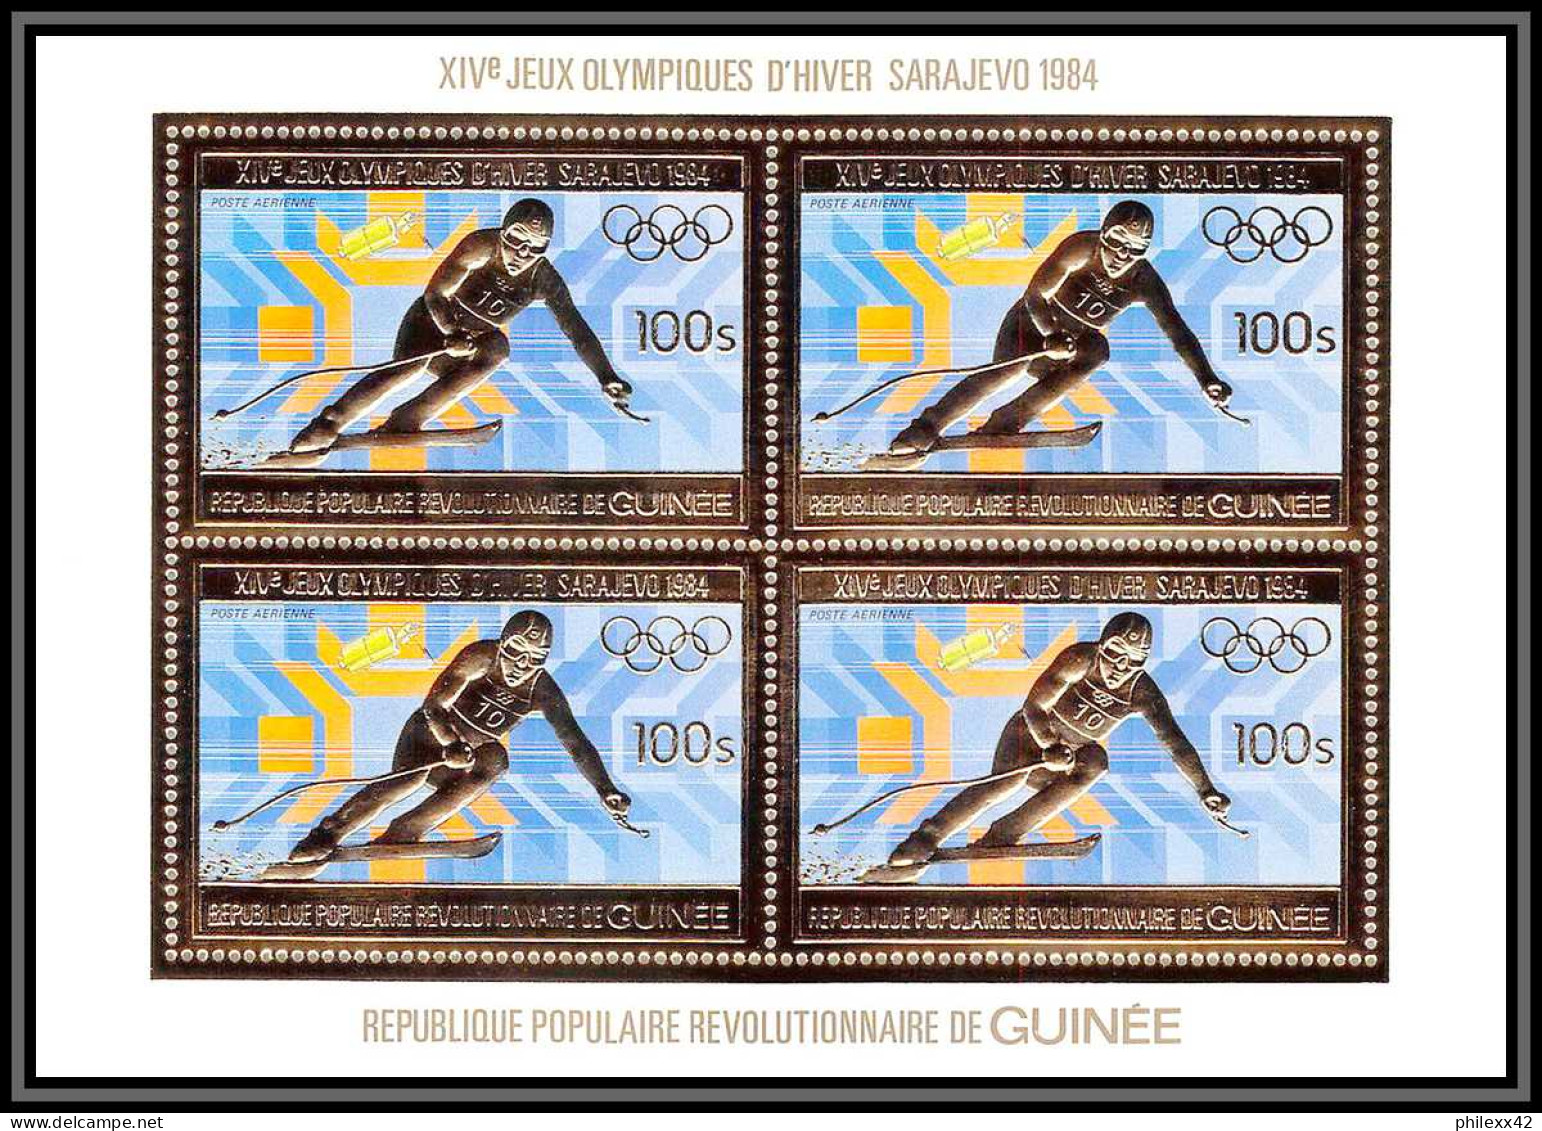 85830/ N°971 A Sarajevo SKI 1984 Jeux Olympiques Olympic Games Guinée Guinea OR Gold Stamps ** MNH Bloc 4 - Hiver 1984: Sarajevo